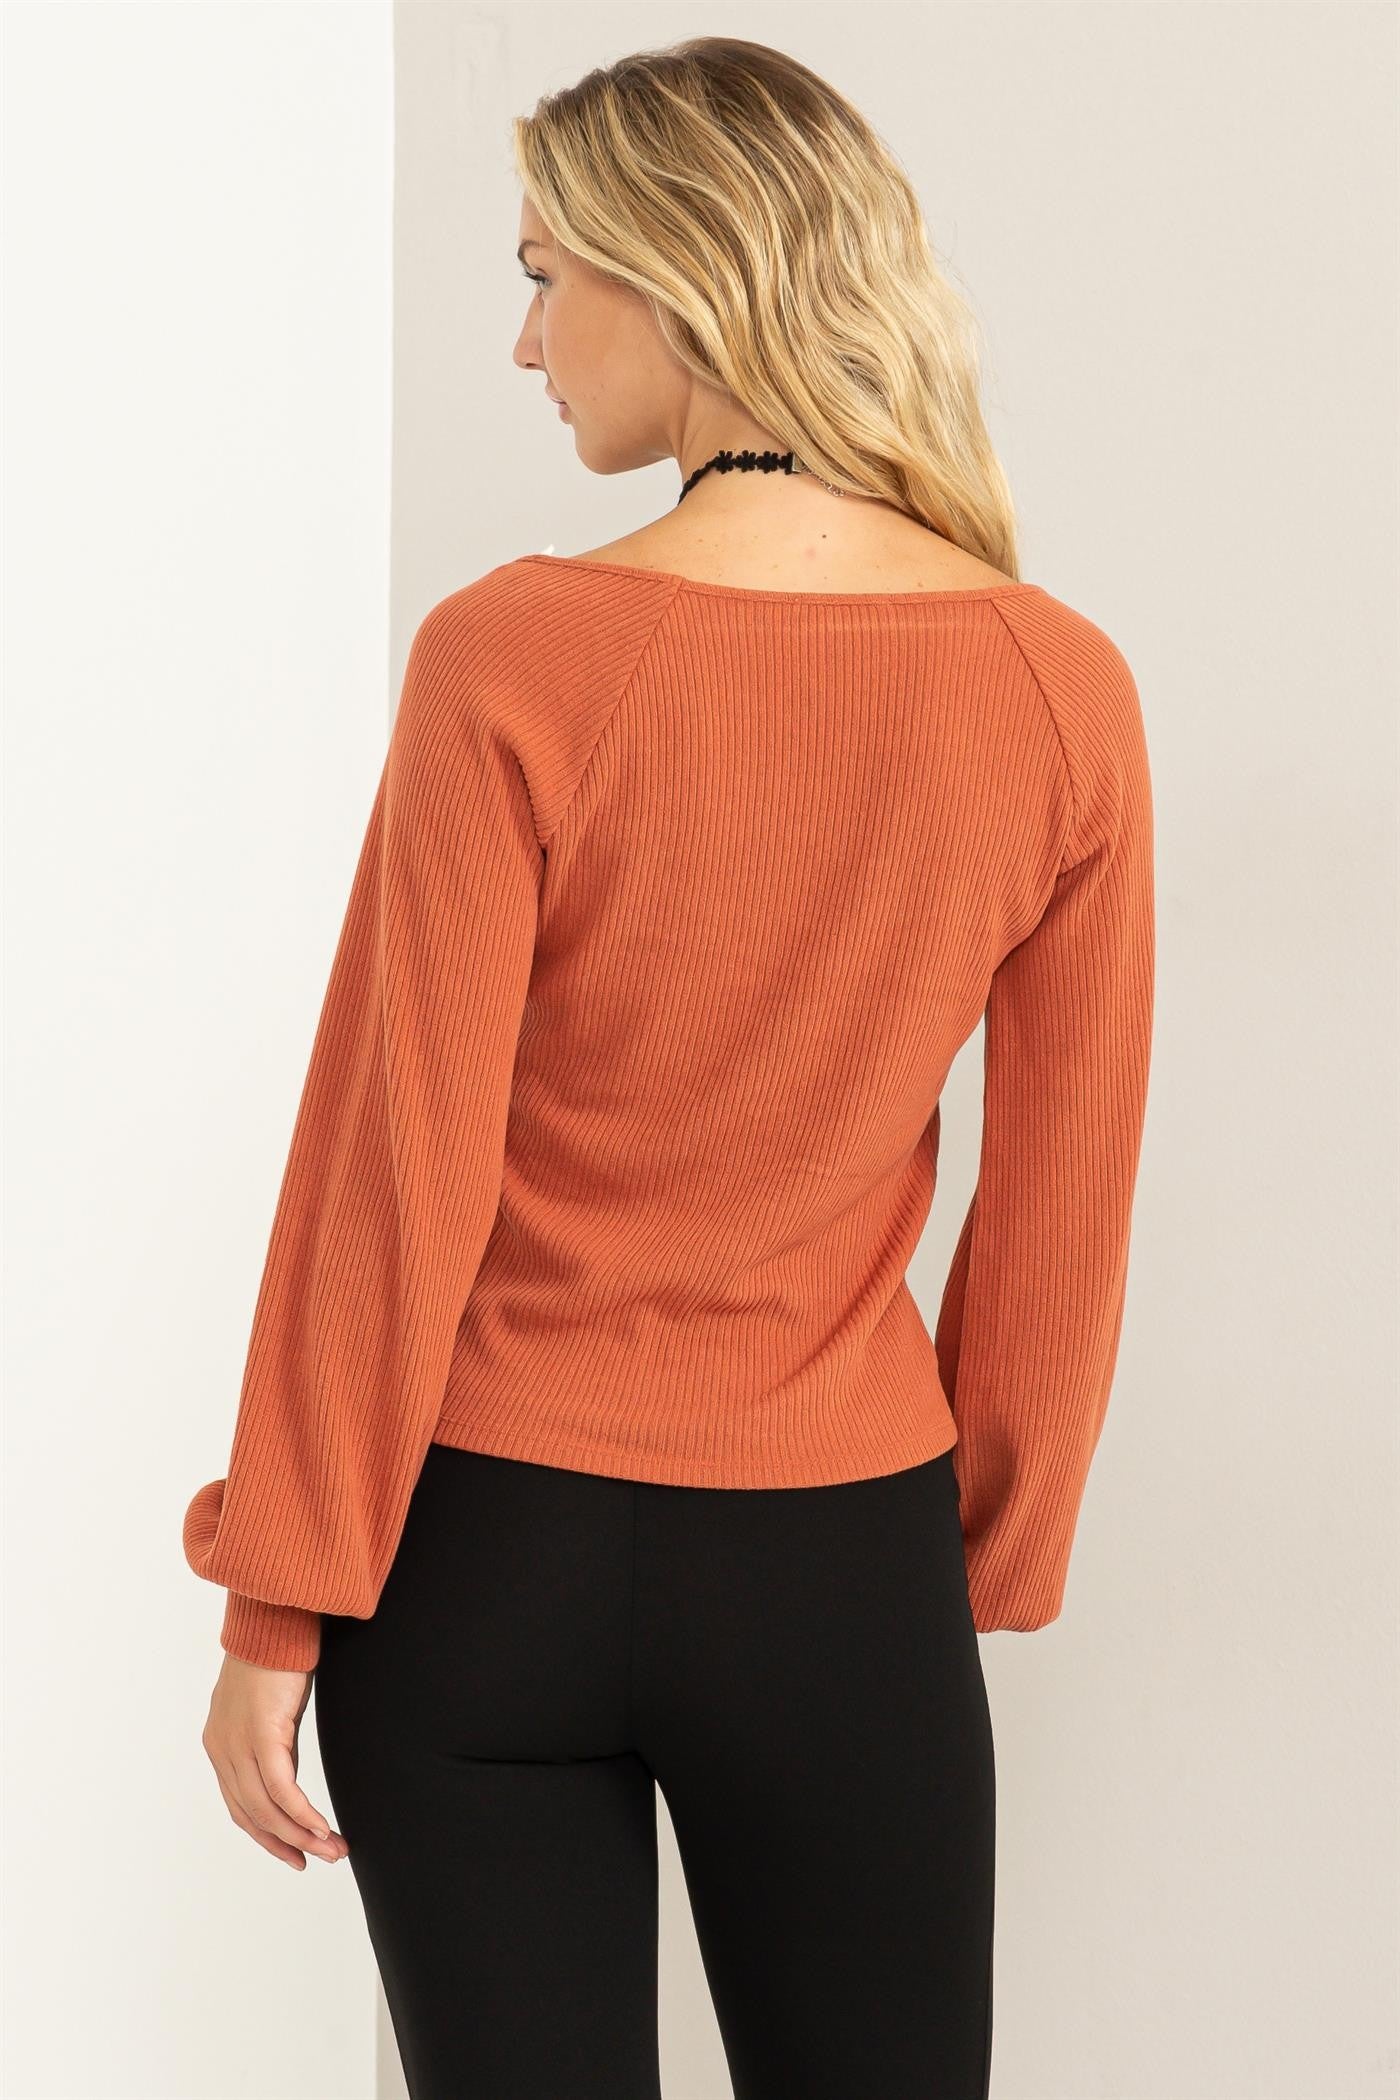 Lolette-Square Neck Balloon Sleeve Top